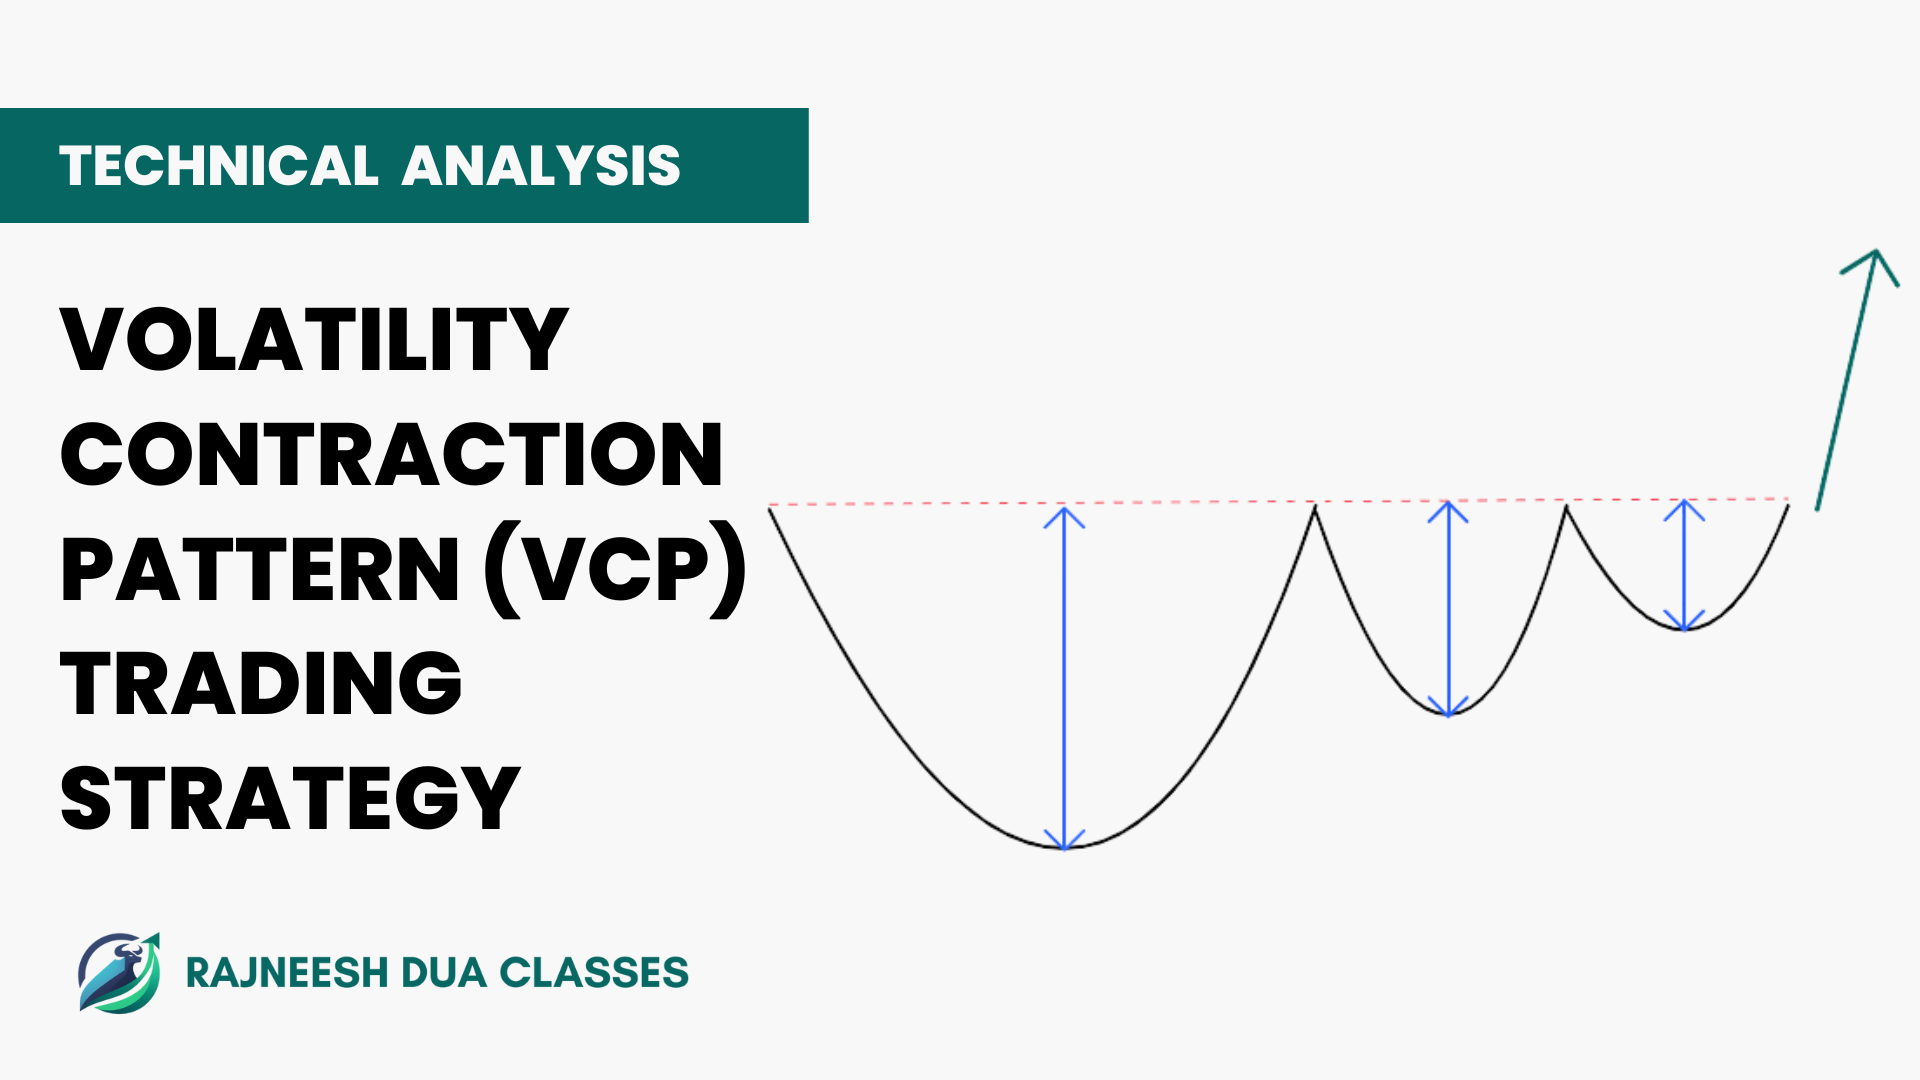 Volatility Contraction Pattern (VCP) Trading Strategy